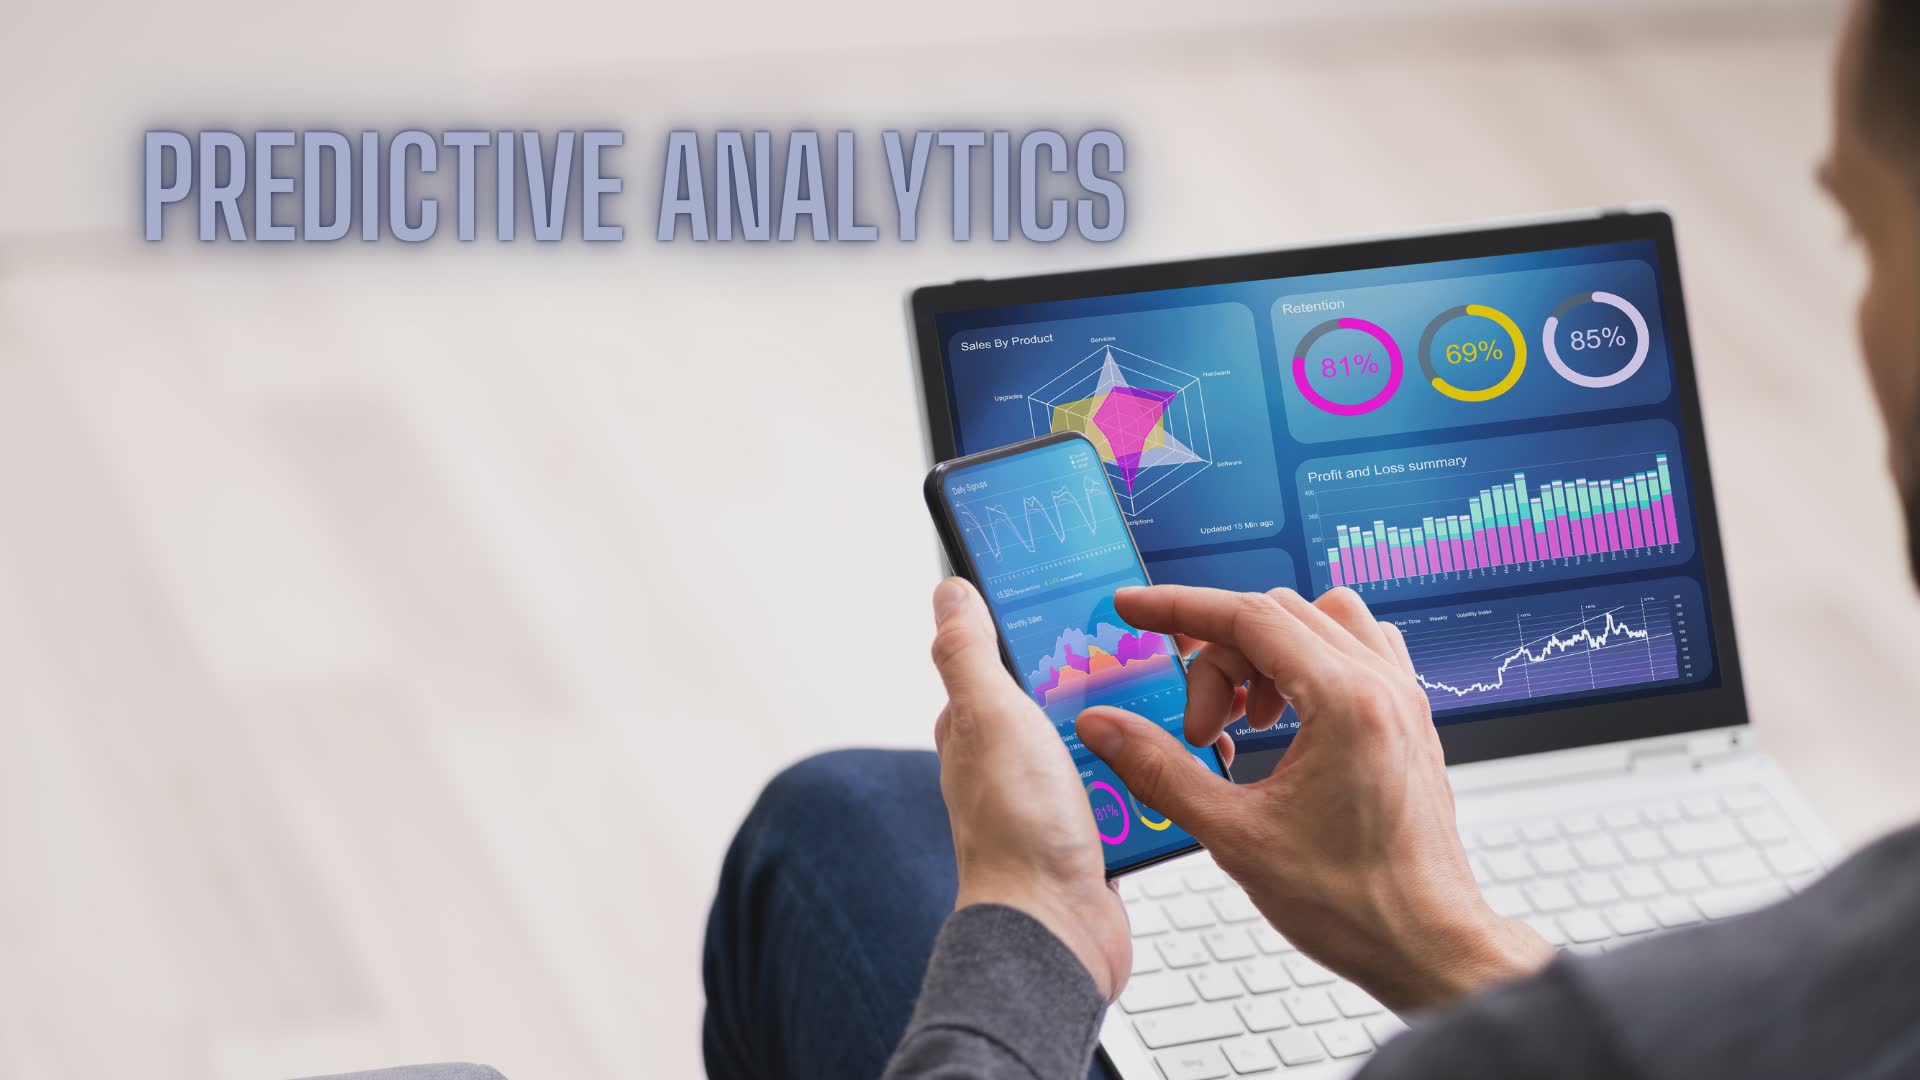 Let’s use predictive analytics based on the data, statistical algorithms and machine learning algorithms to identify the likelihood of future outcomes – based on available historical data.